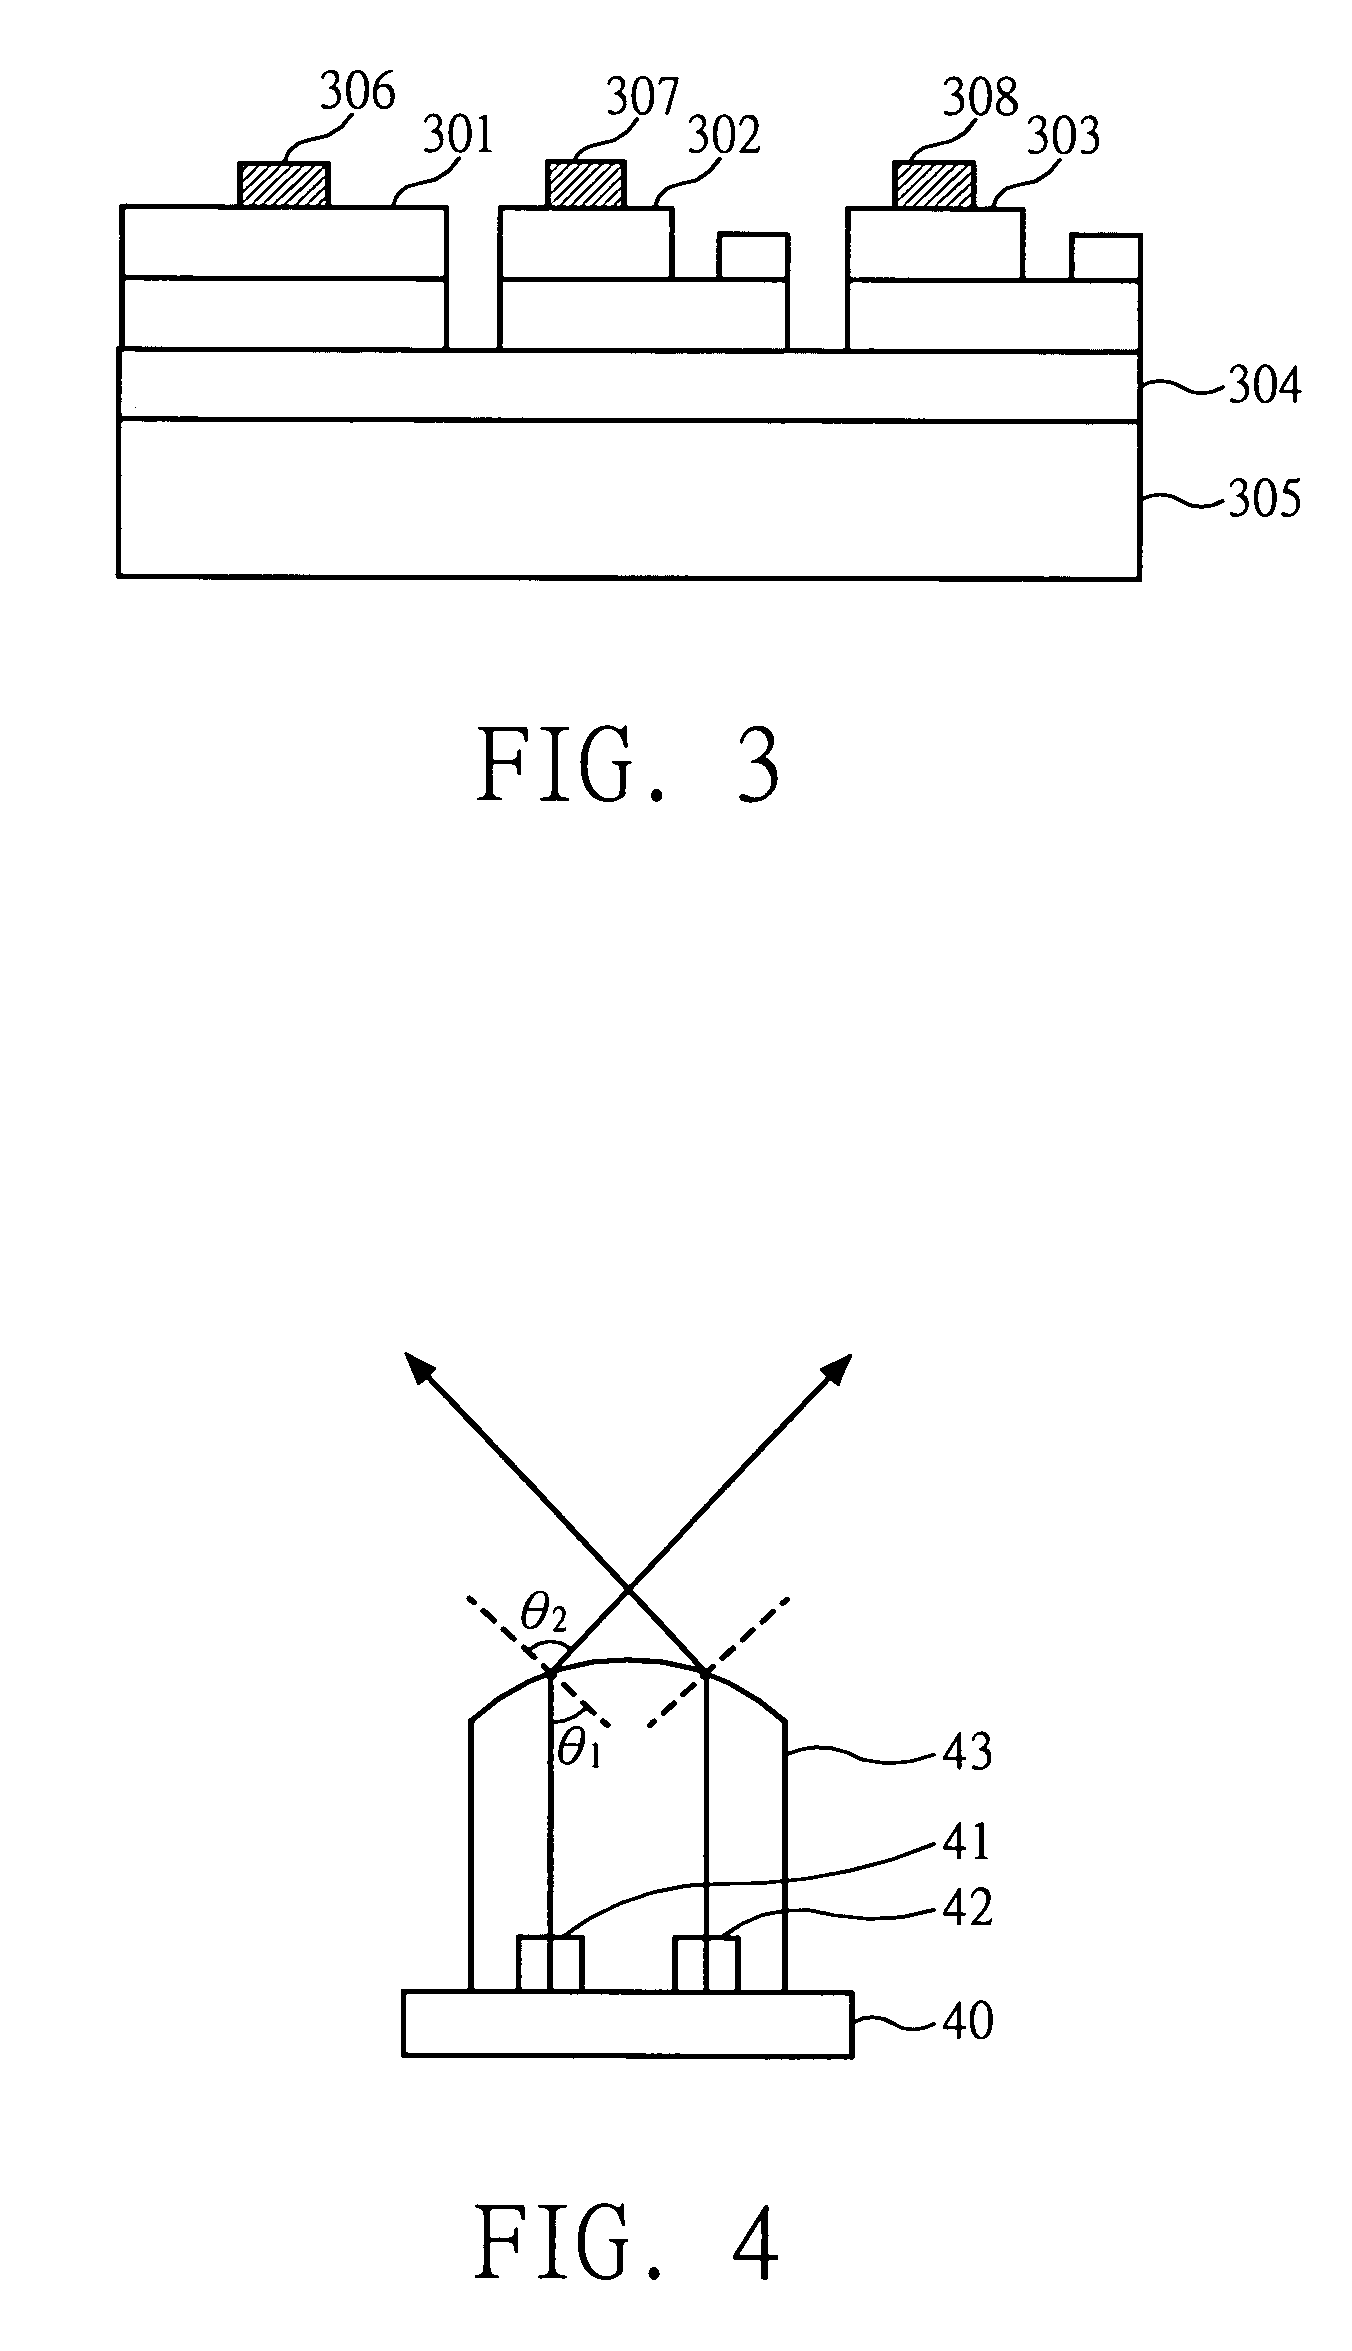 Multichip light emitting diode package